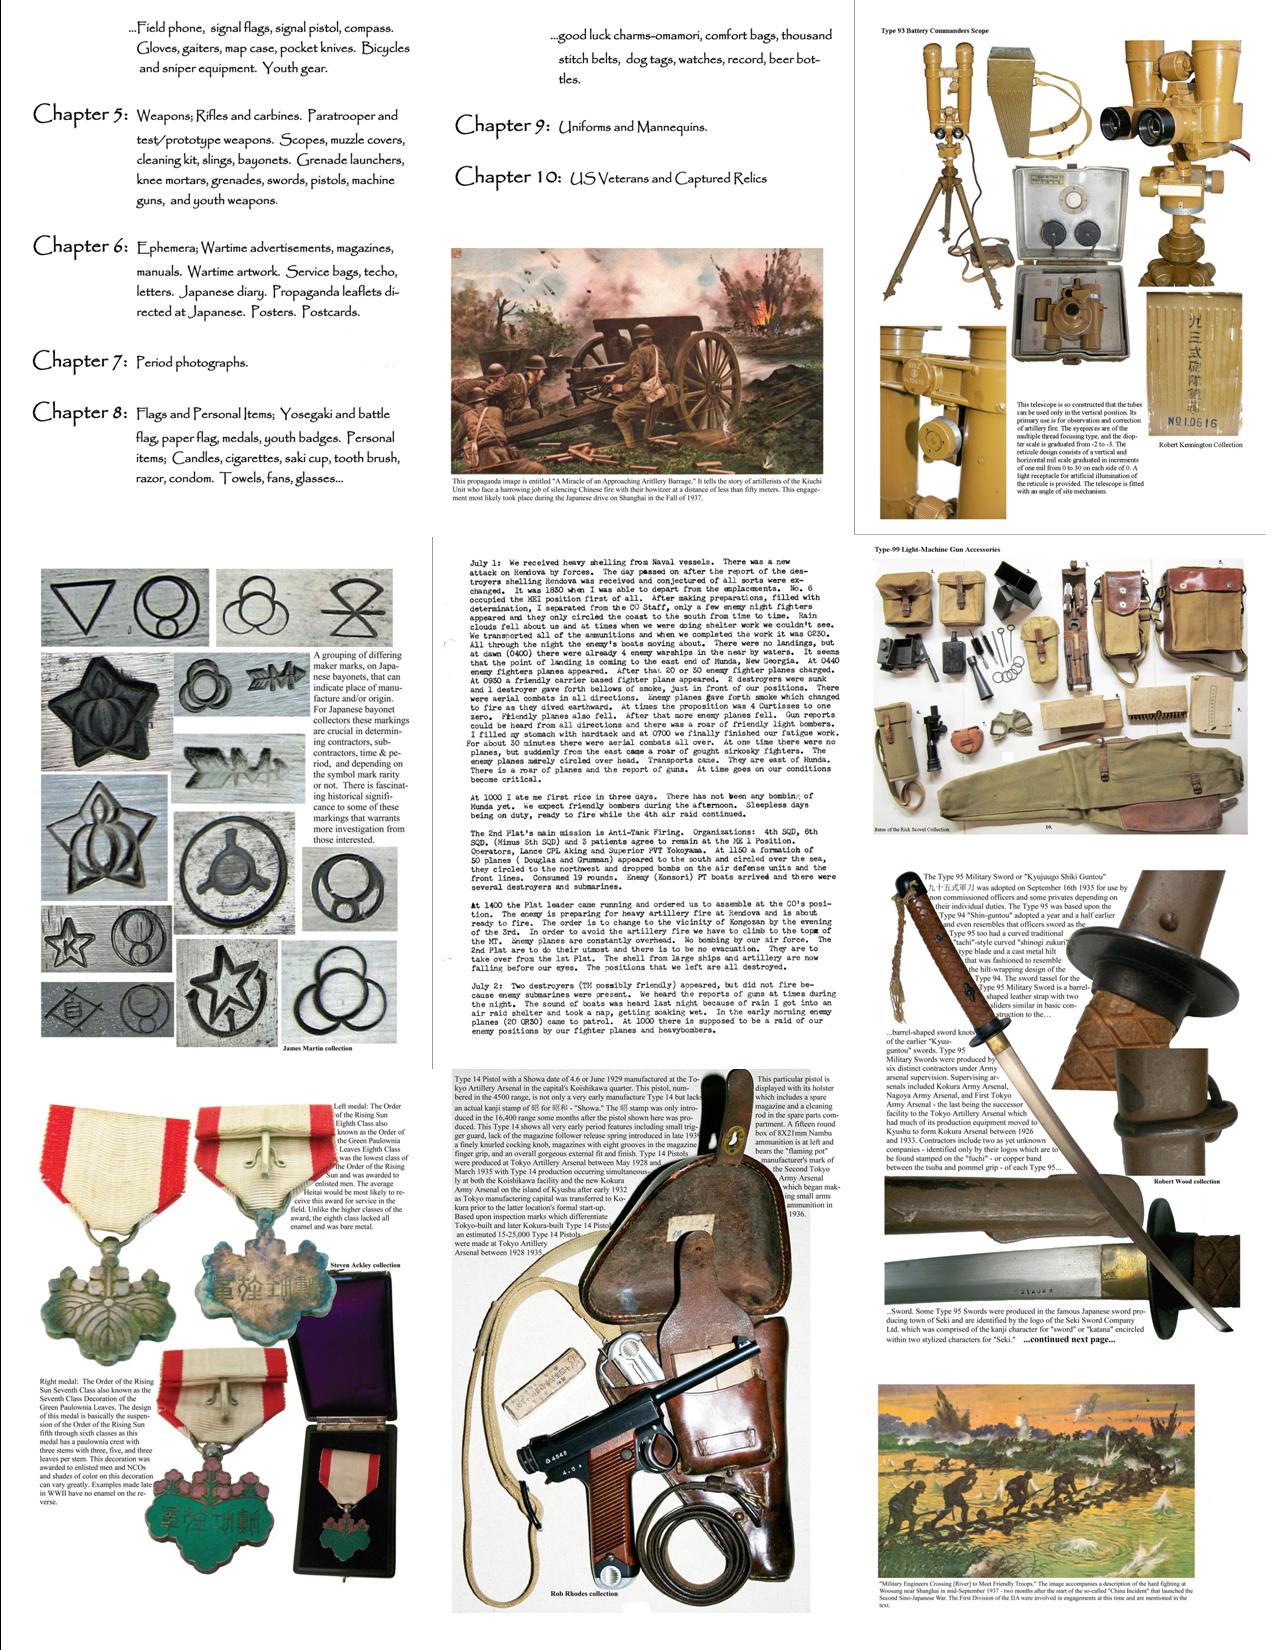 Great War Relics - WW I & WWII Artifacts